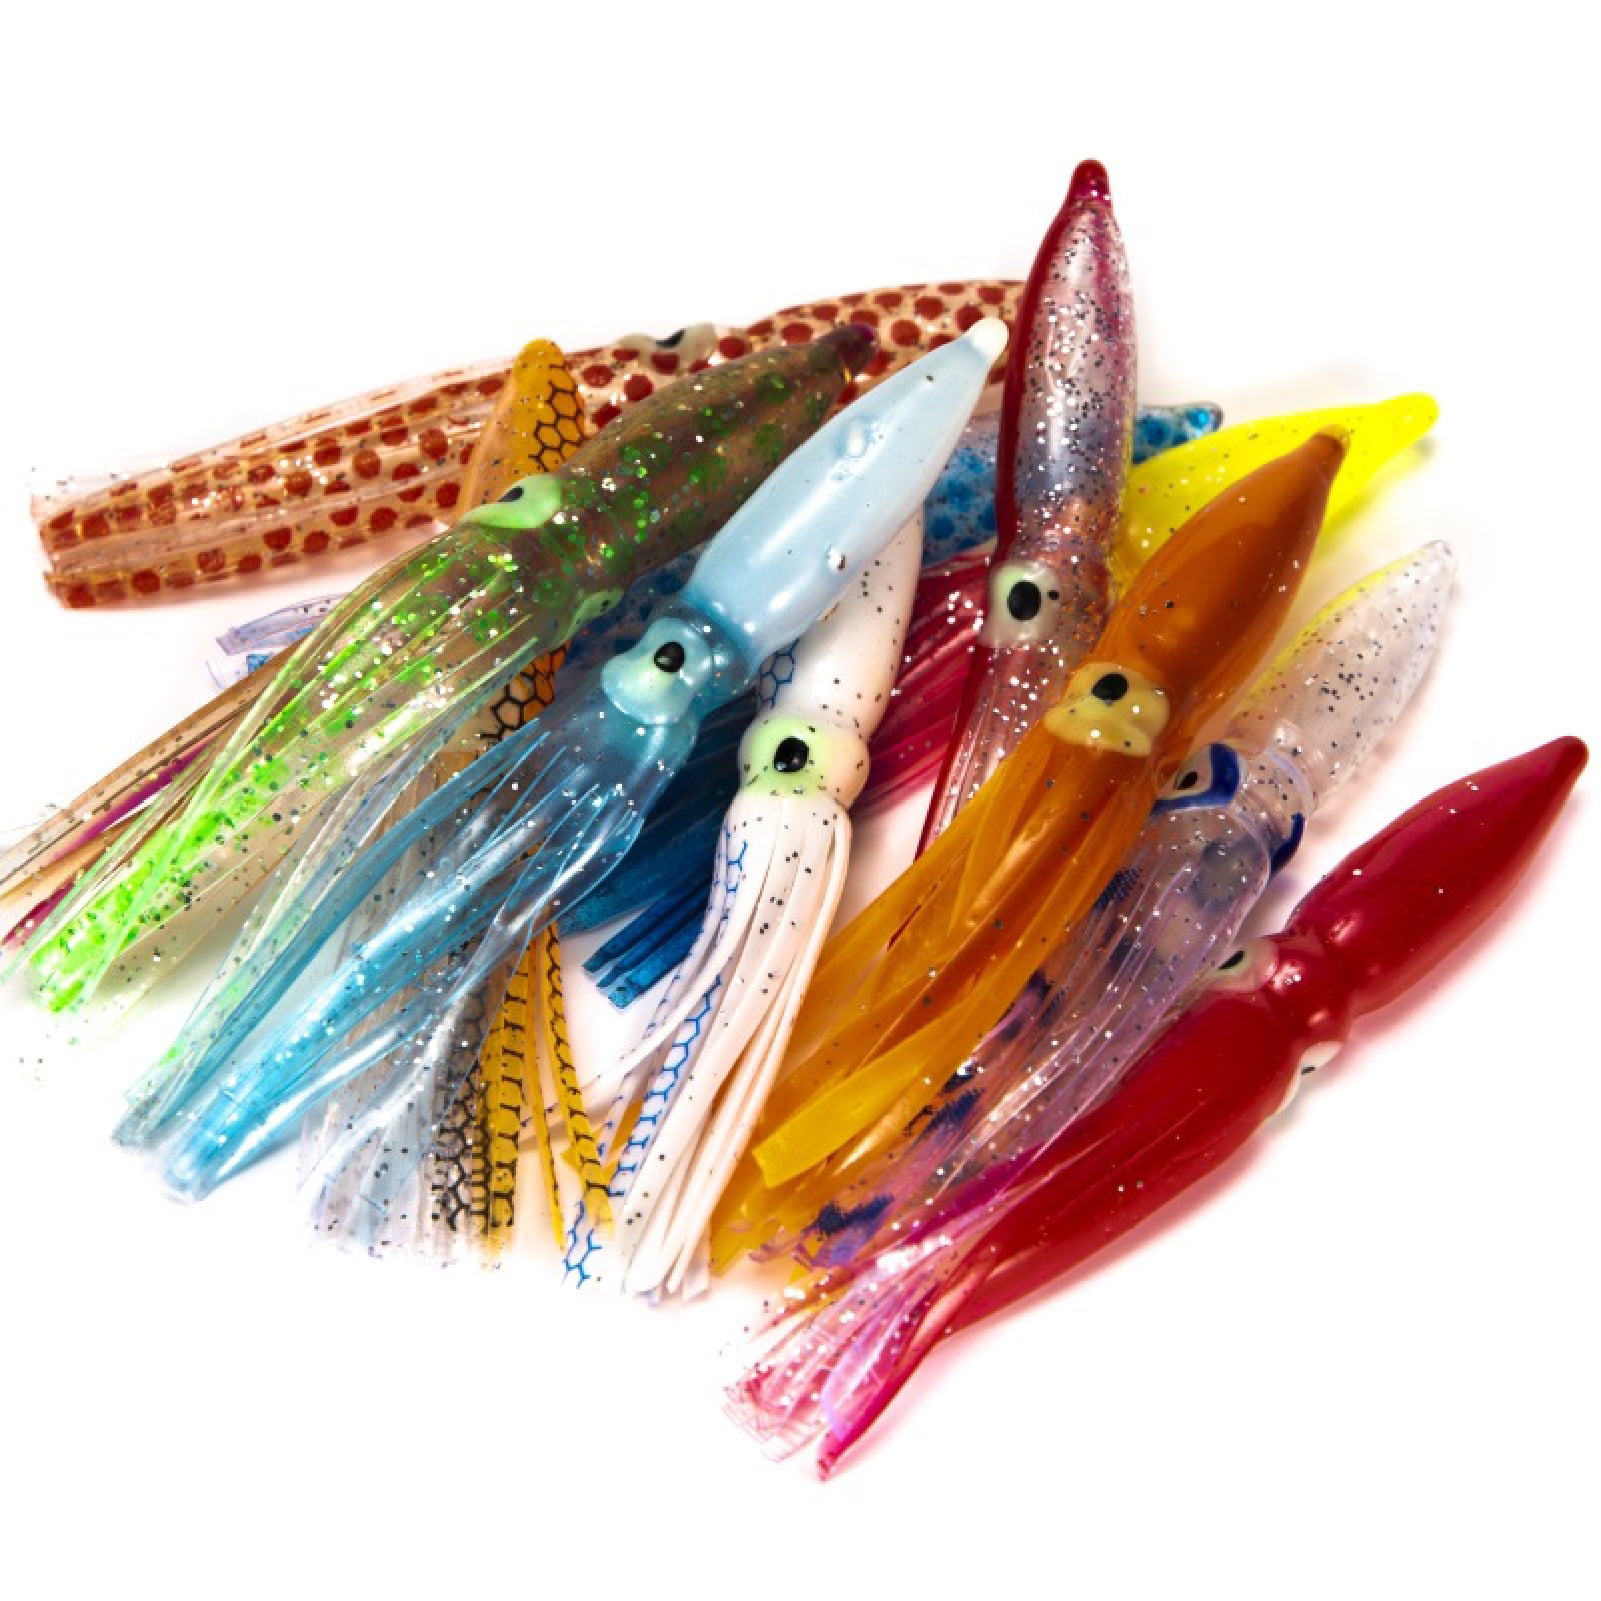 Octopus Squid Fishing Lure Skirts- 10pcs 8cm Saltwater Trolling Fishing  Lures Soft Plastic Octopus Bait Squid Skirt, Fake Lure Bionic Soft Bait for  Outdoor Fishing 